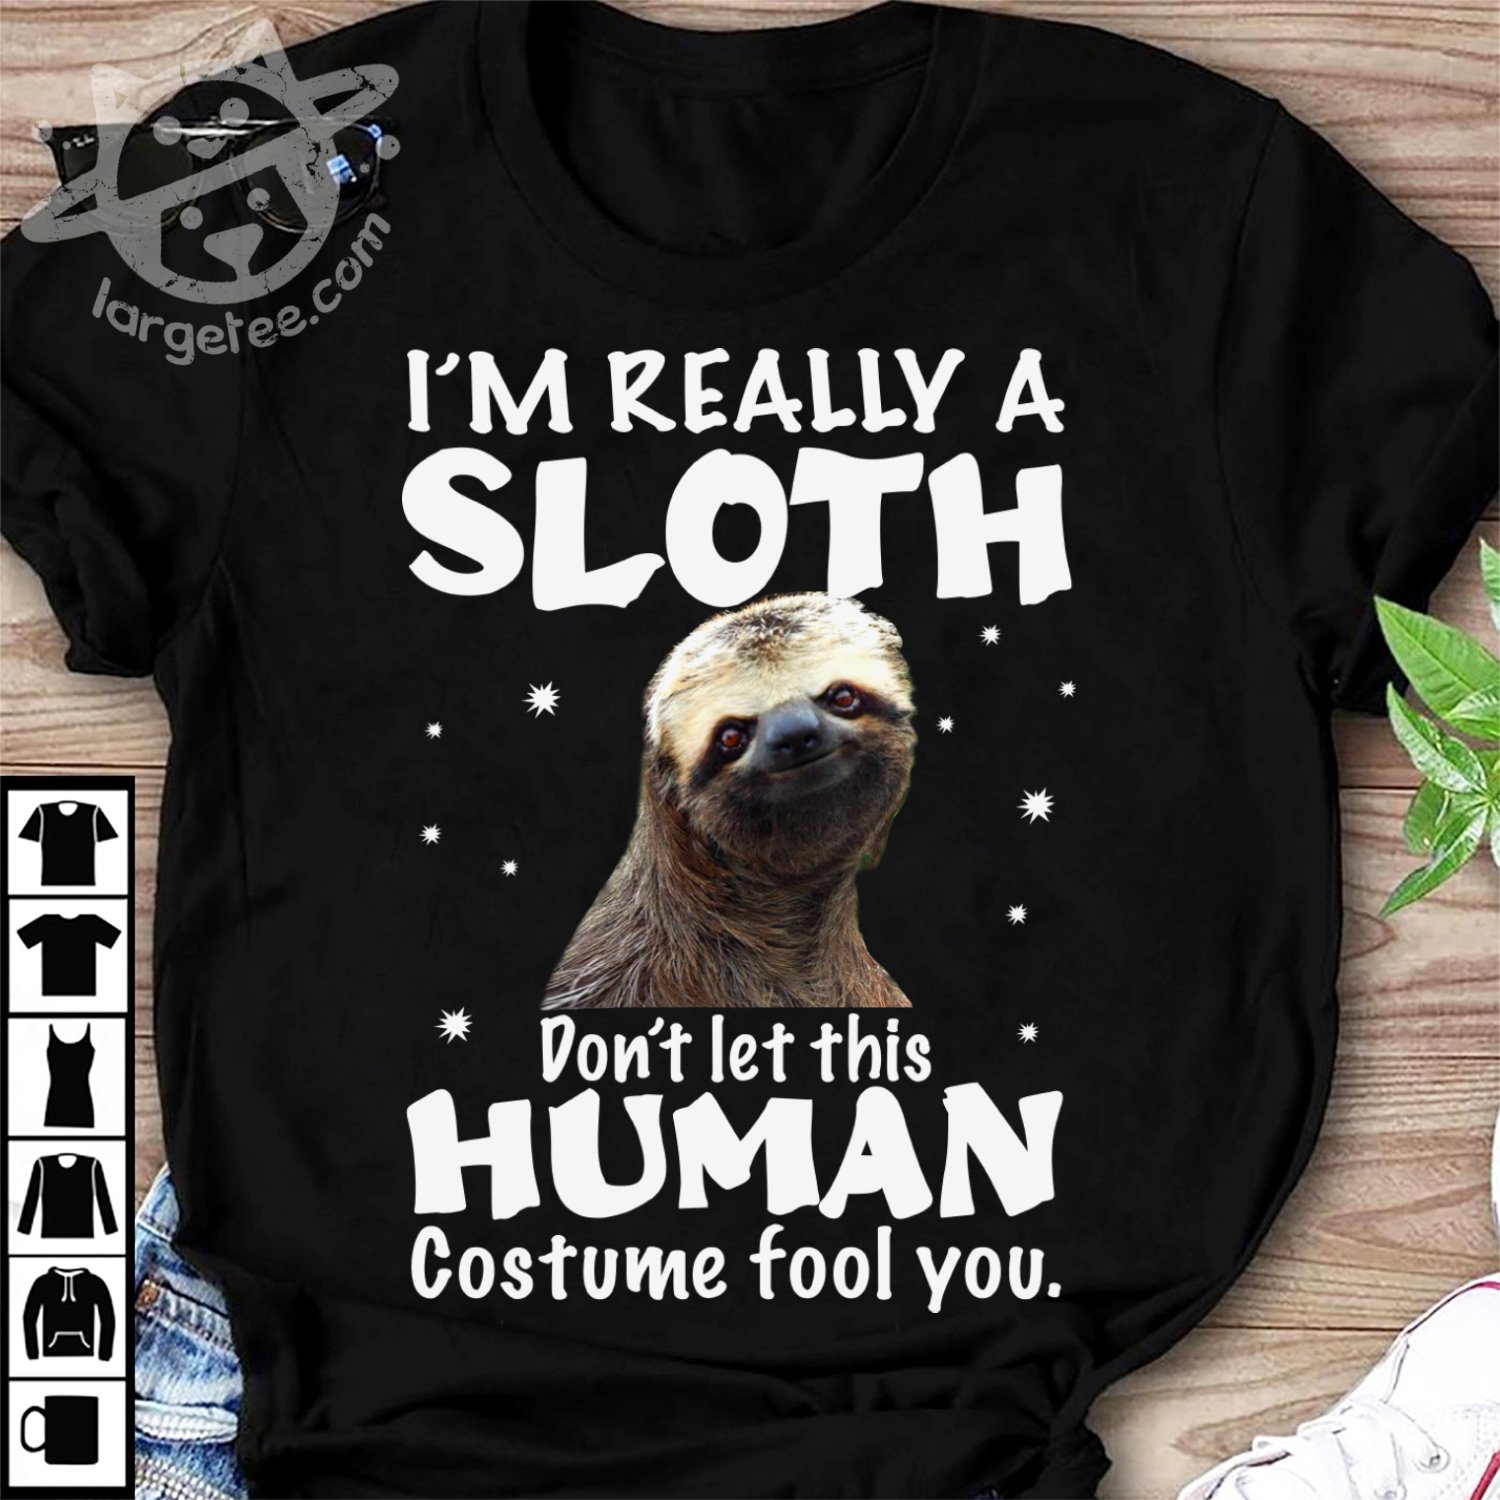 I'm really a sloth don't let this human costume fool you - Grumpy sloth